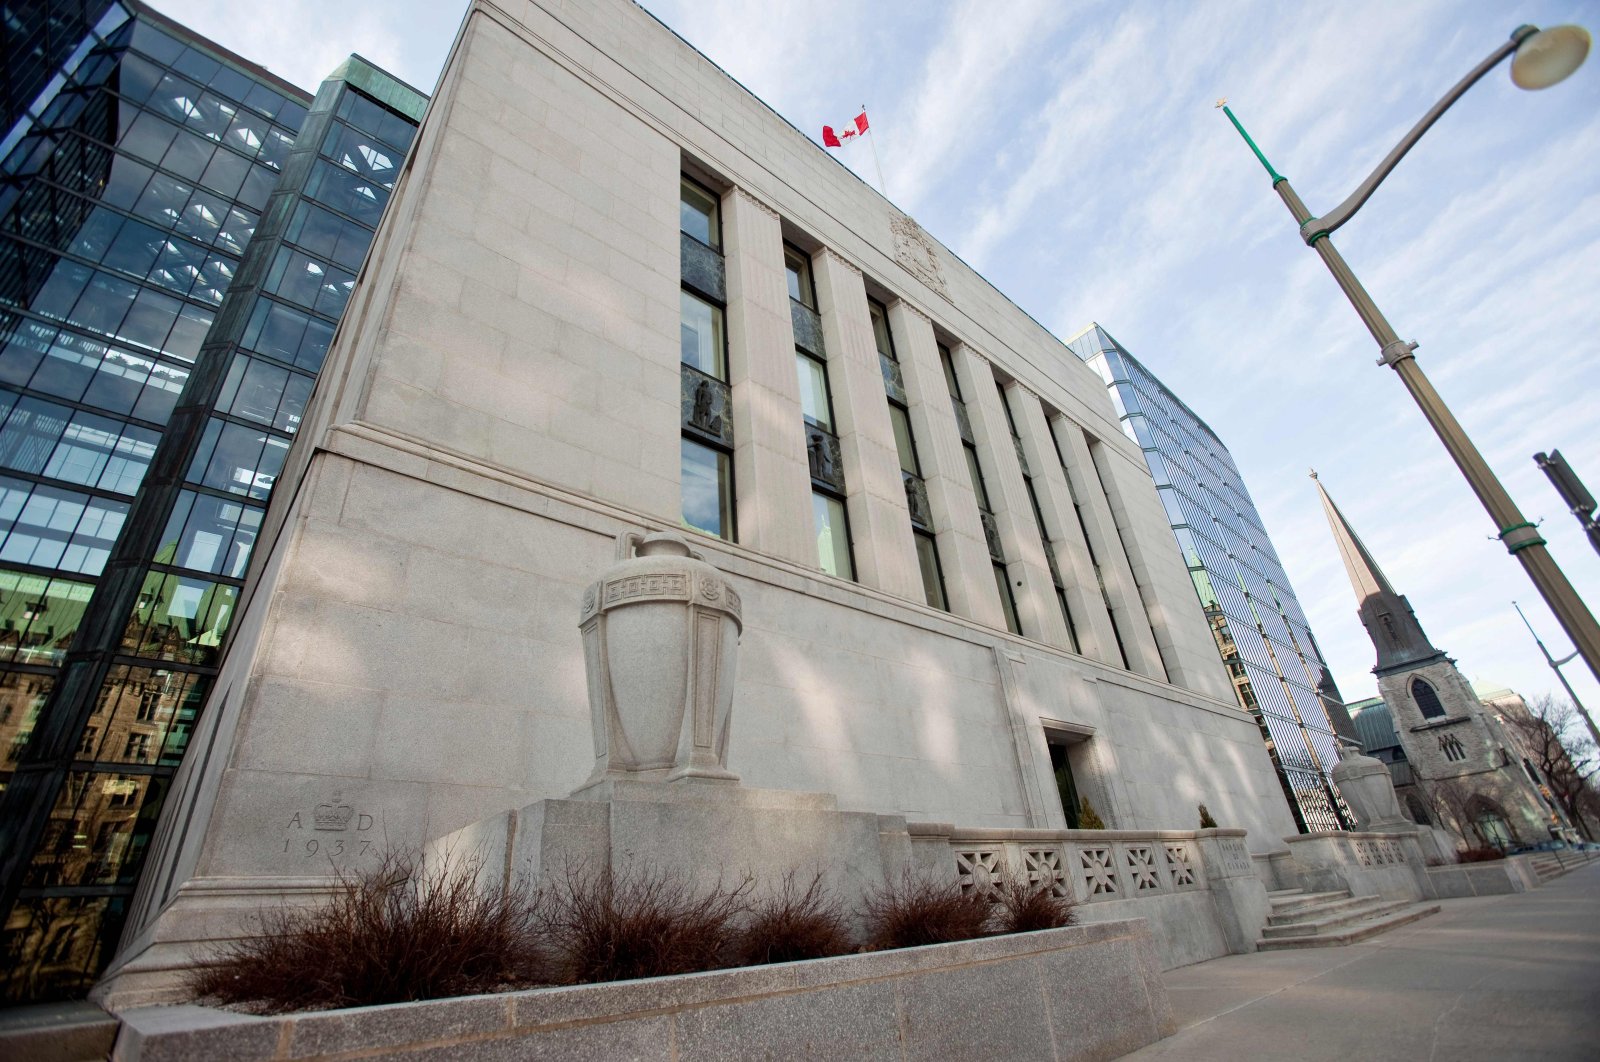 The Bank of Canada building in Ottawa, Canada, April 12, 2011. (AFP File Photo)